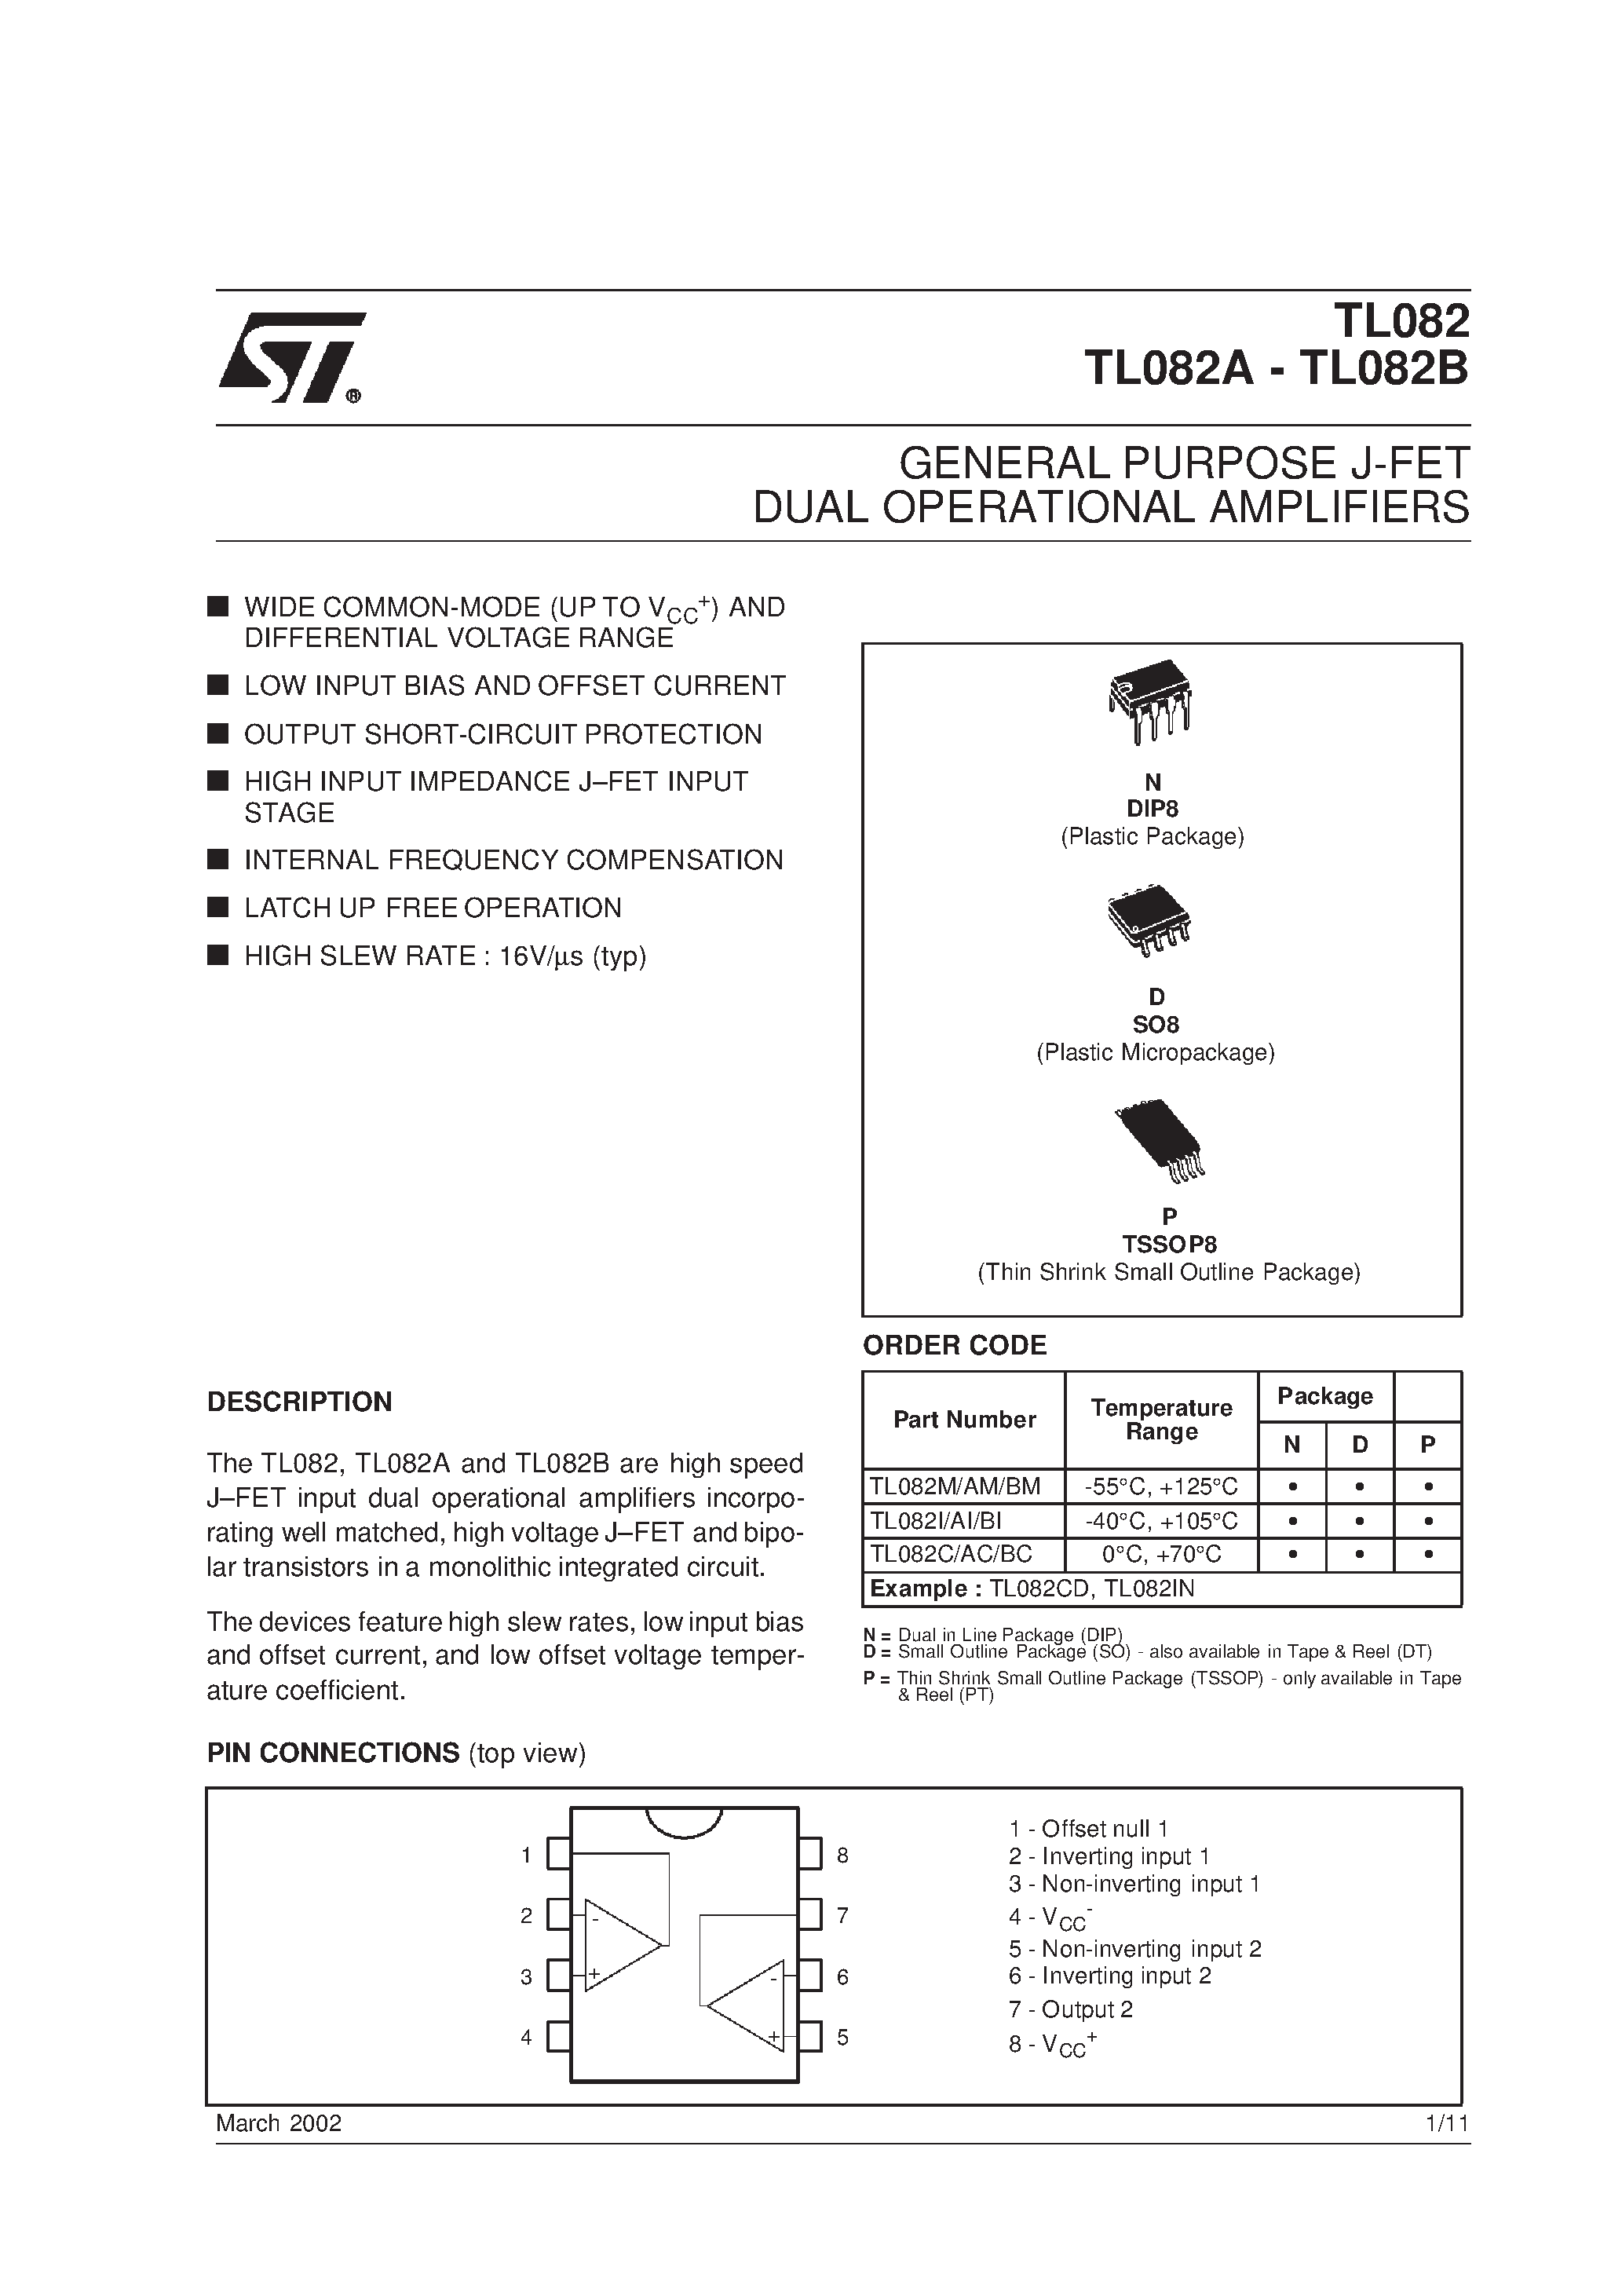 Datasheet TL082I - GENERAL PURPOSE J-FET DUAL OPERATIONAL AMPLIFIERS page 1